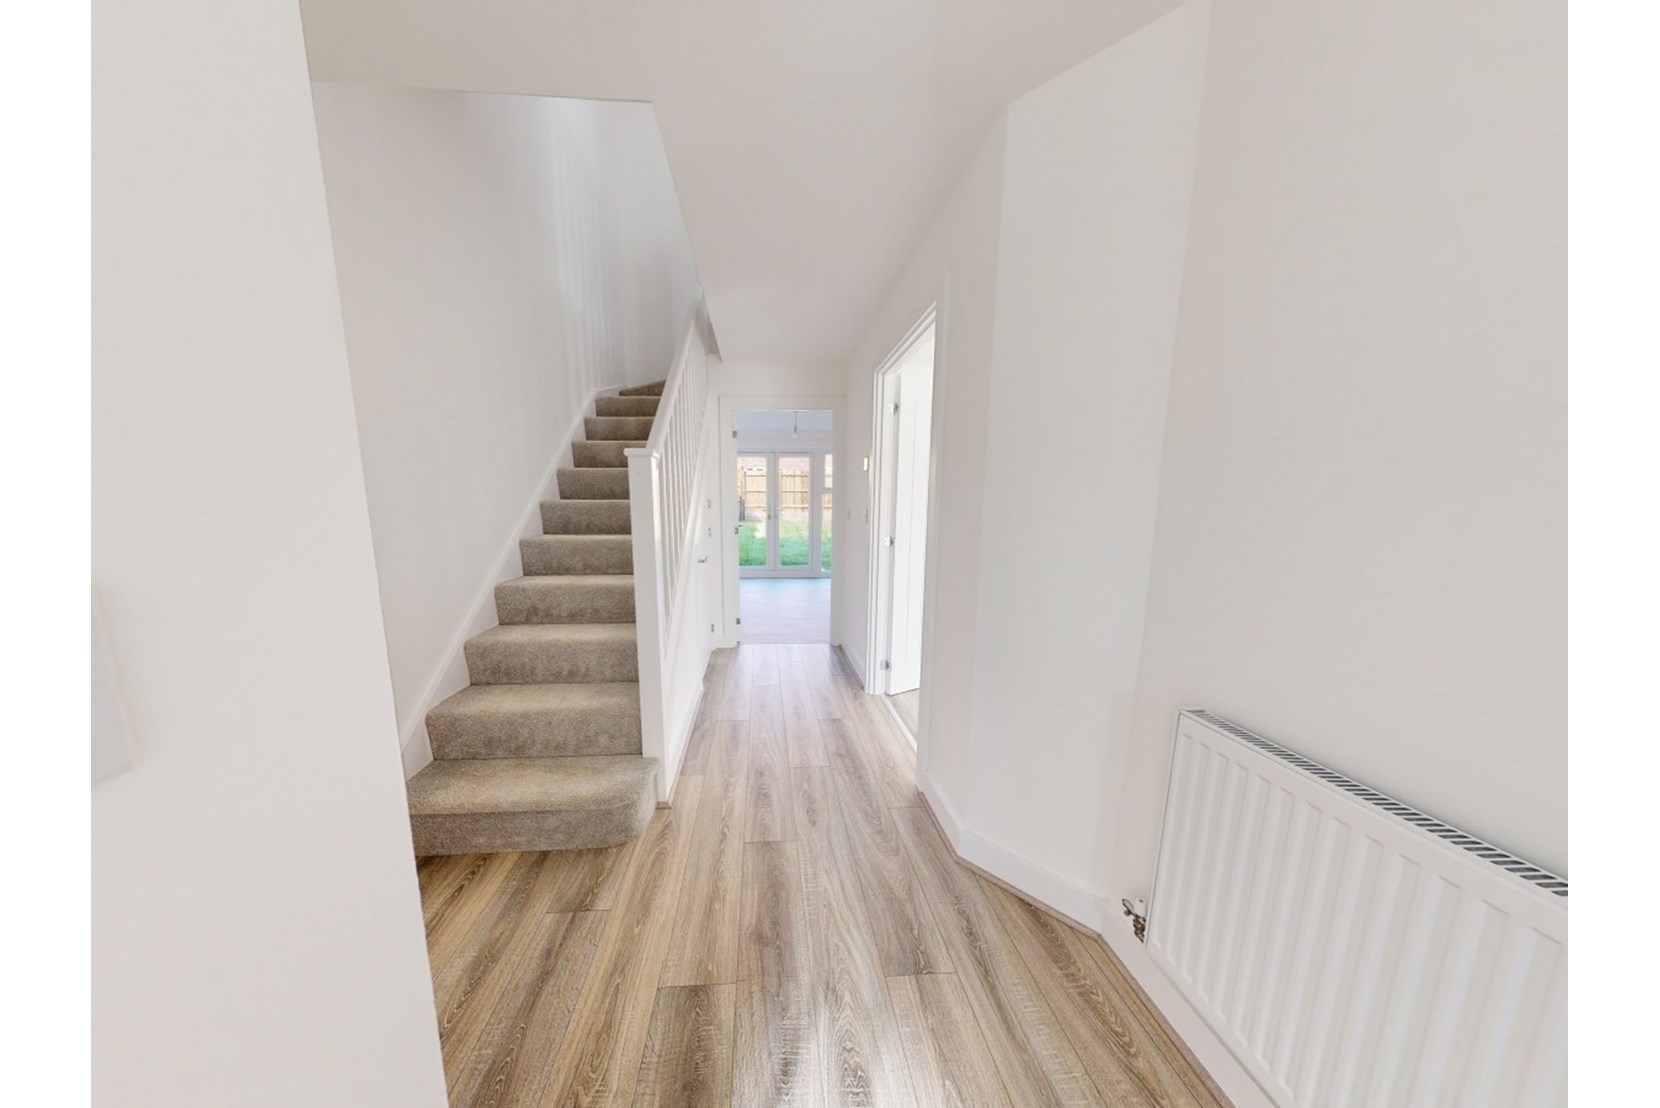 House-Allsop-The-Pioneers-Houlton-Rugby-interior-hallway-stairs-layout